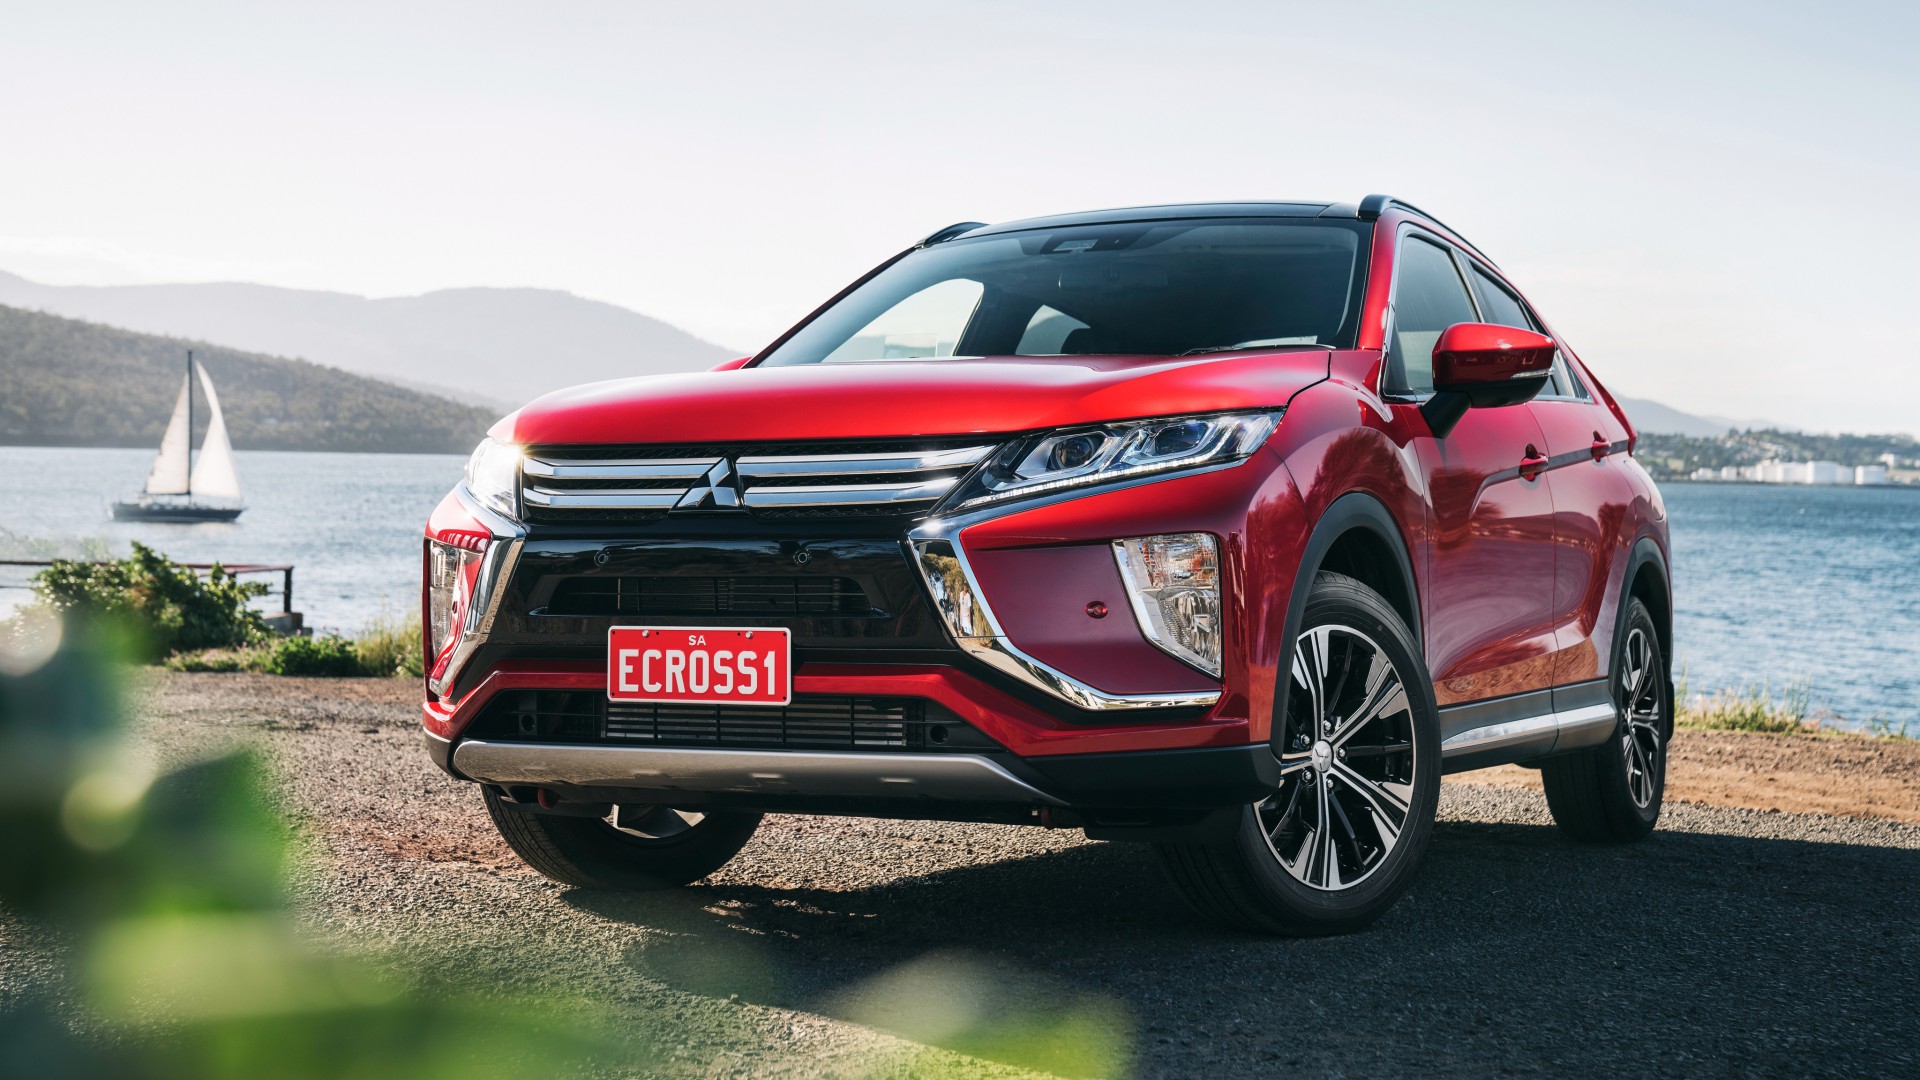 2018 Mitsubishi Eclipse Cross Exceed Wallpaper | HD Car Wallpapers | ID